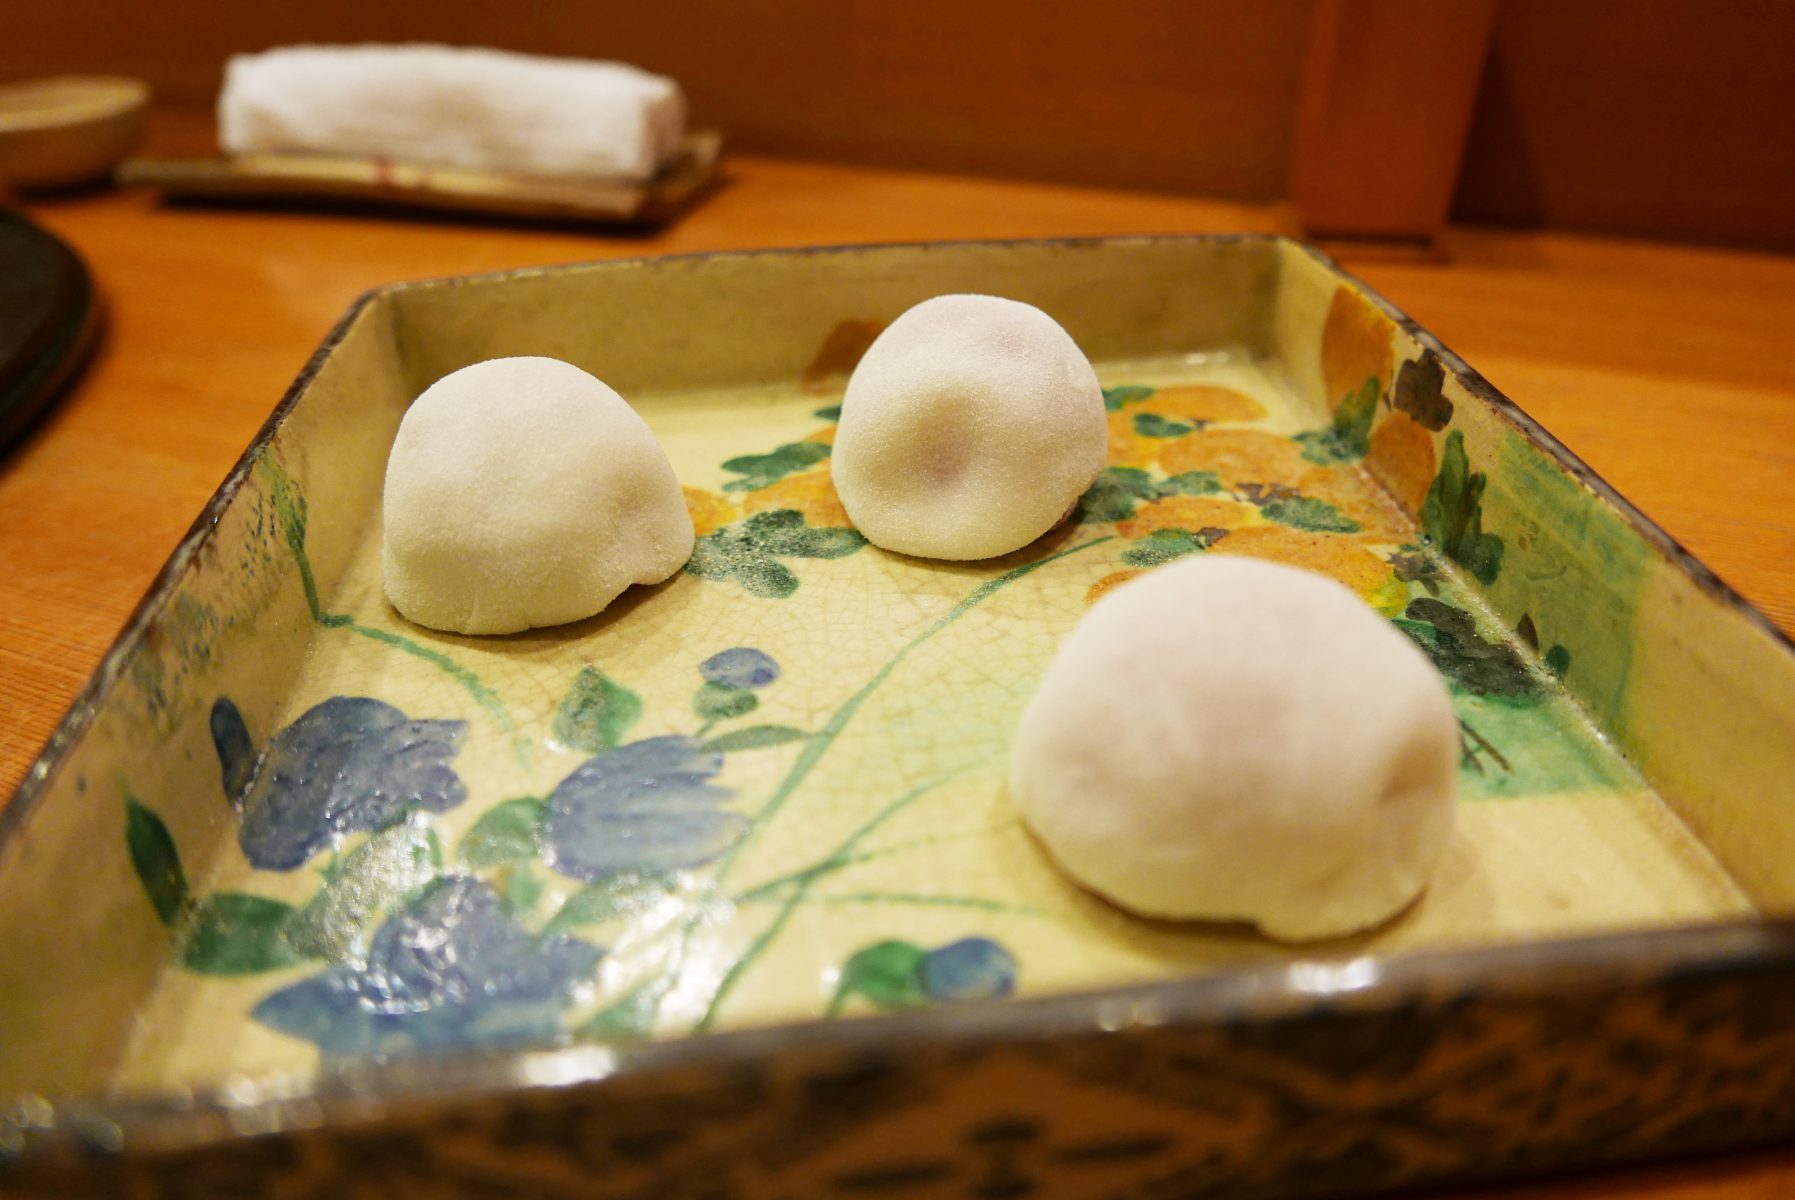 Daifuku dough enrobed strawberries served on the antique plate at Suzue,Kyoto.